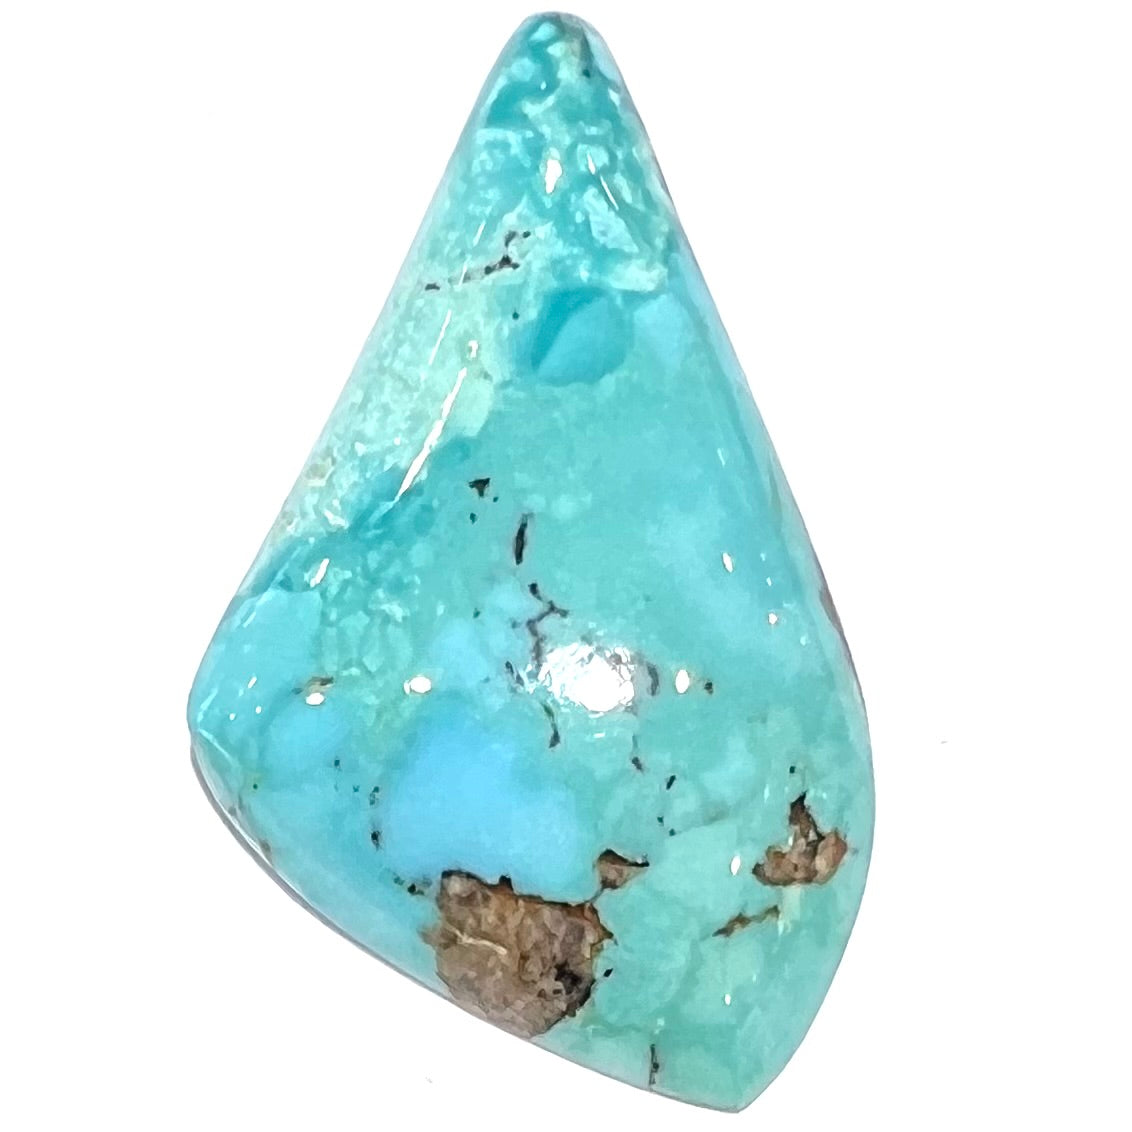 A loose, drop shape turquoise stone from the Sleeping Beauty Mine.